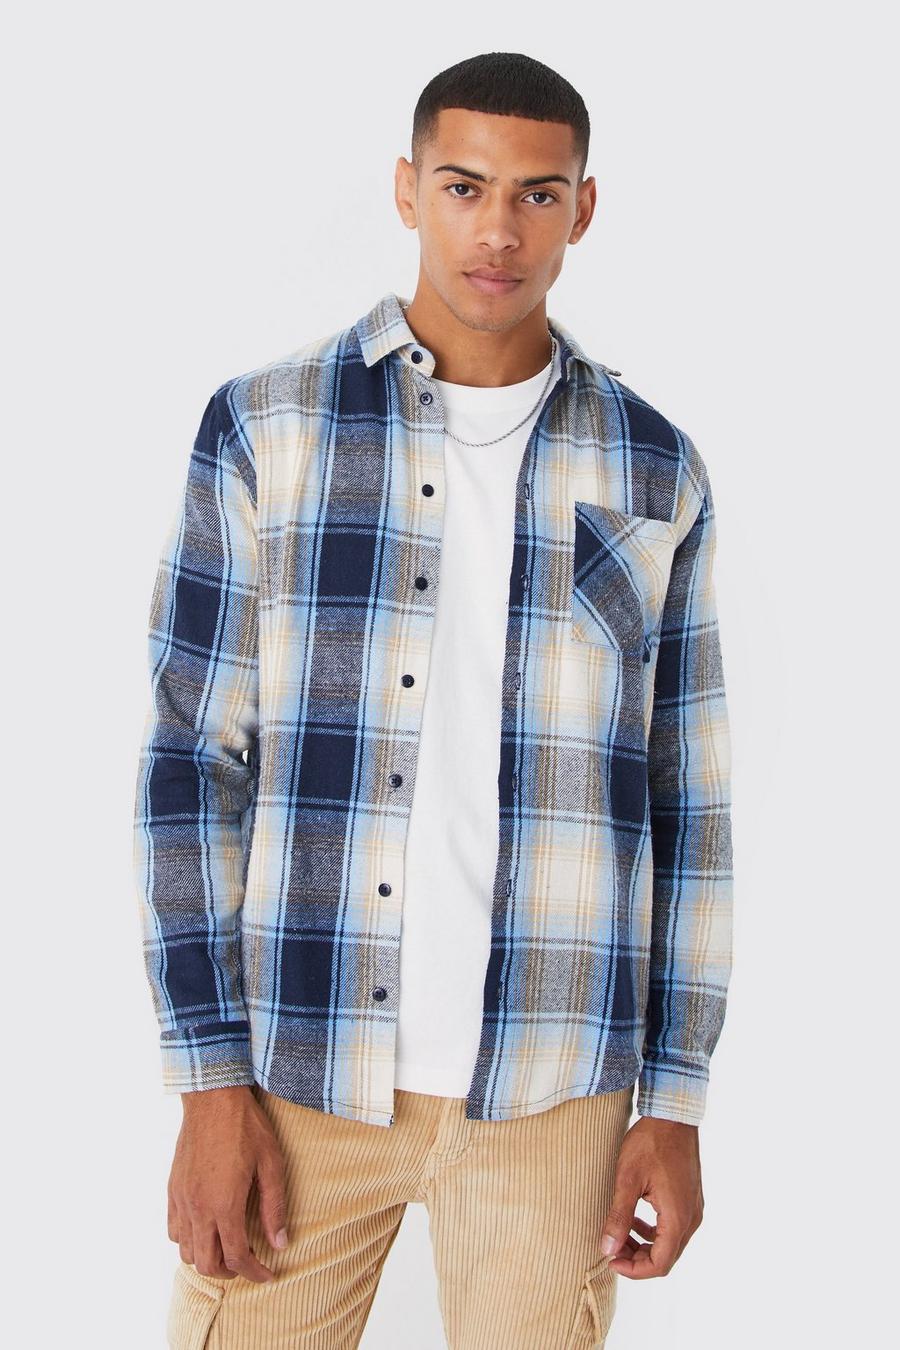 Stone beis Long Sleeve Large Scale Contrast Check Shirt